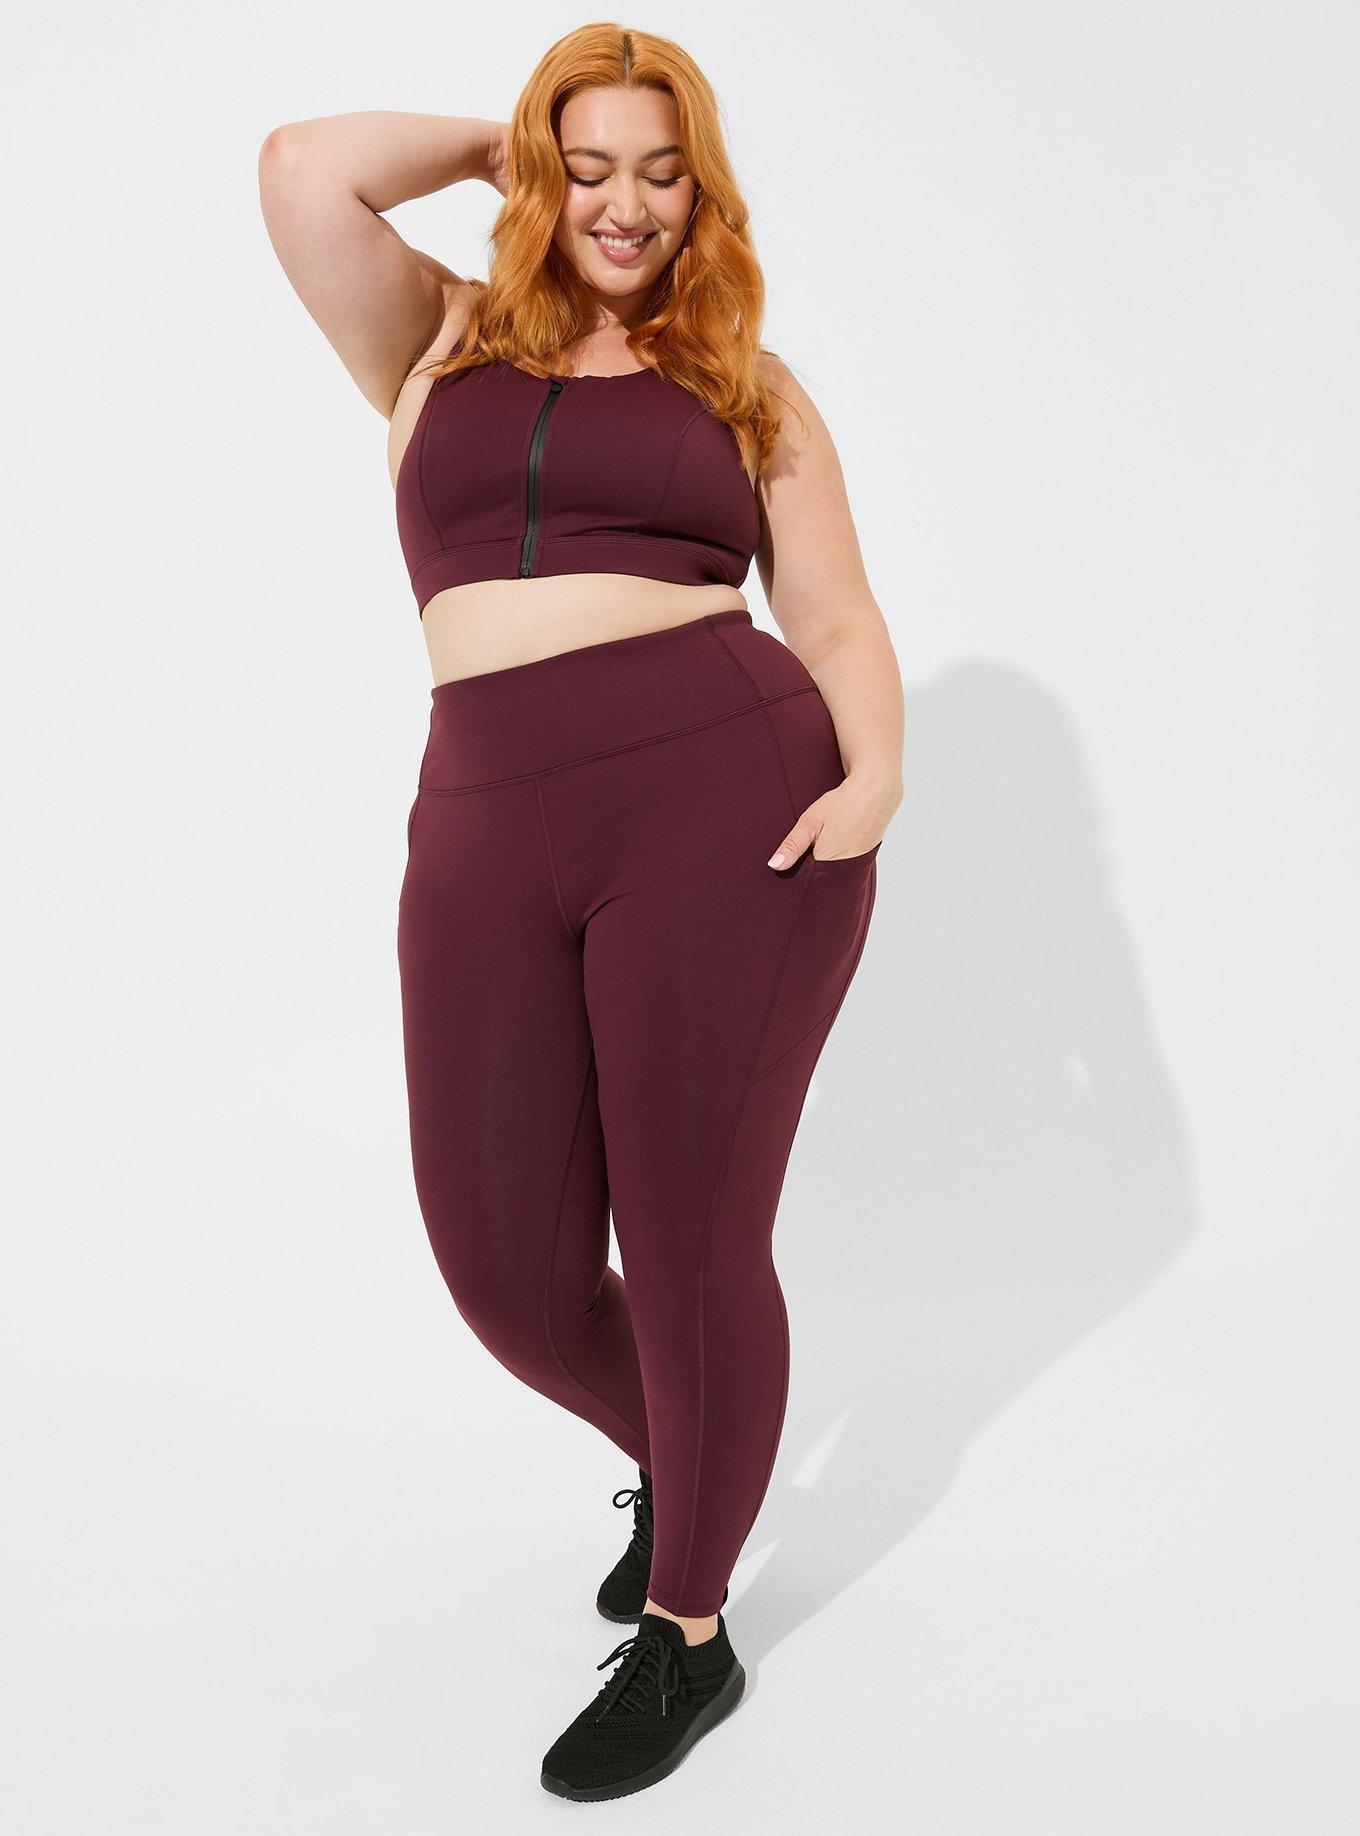 Torrid Plus Size Women's Clothing for sale in Norco, California